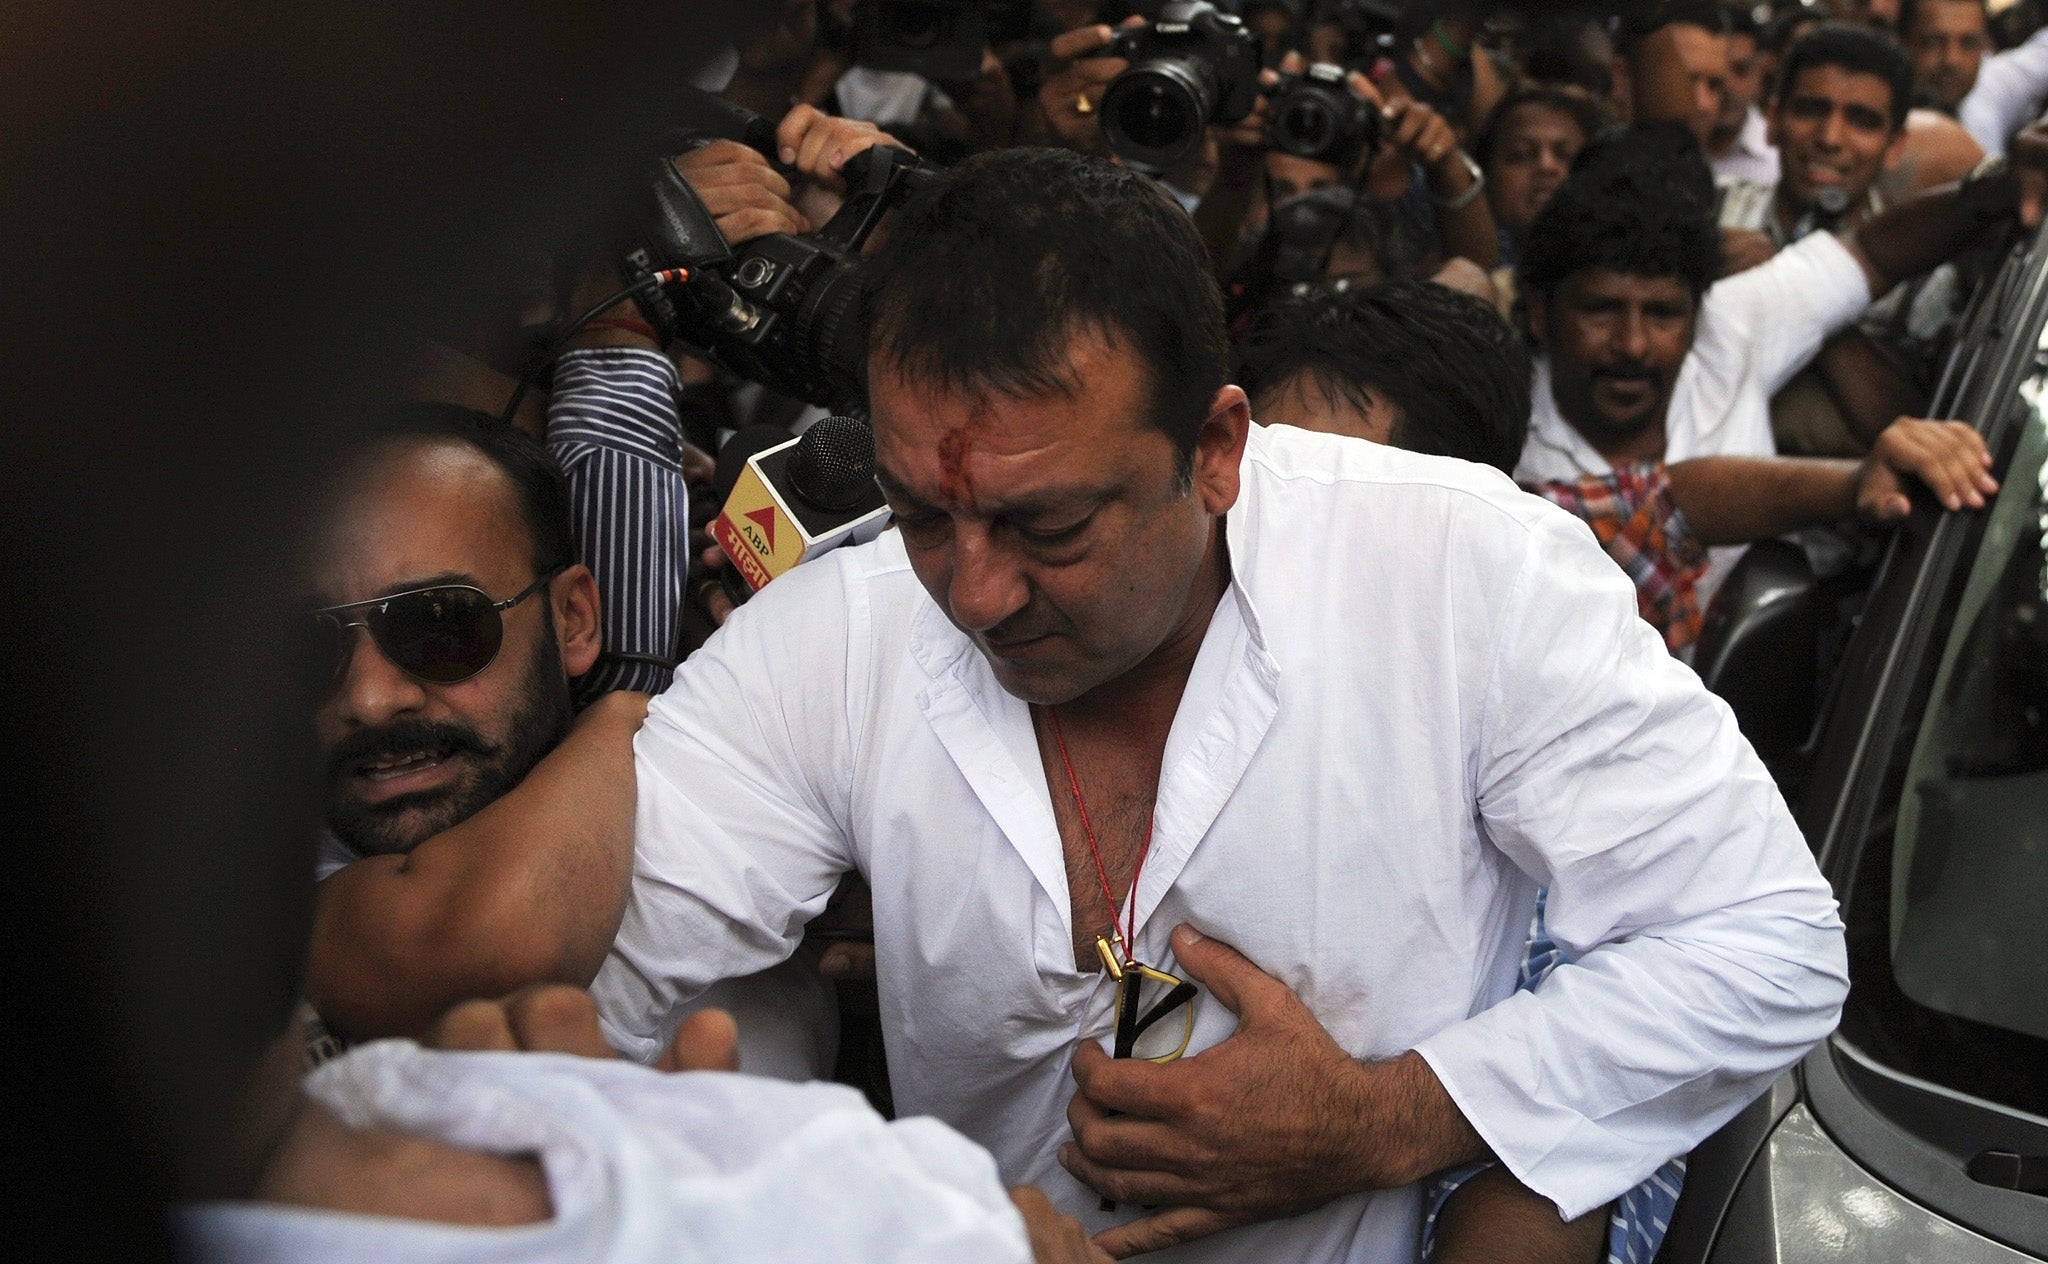 Actor Sanjay Dutt, one of Bollywood's biggest stars, has had a controversial life after being booked under the Arms Act